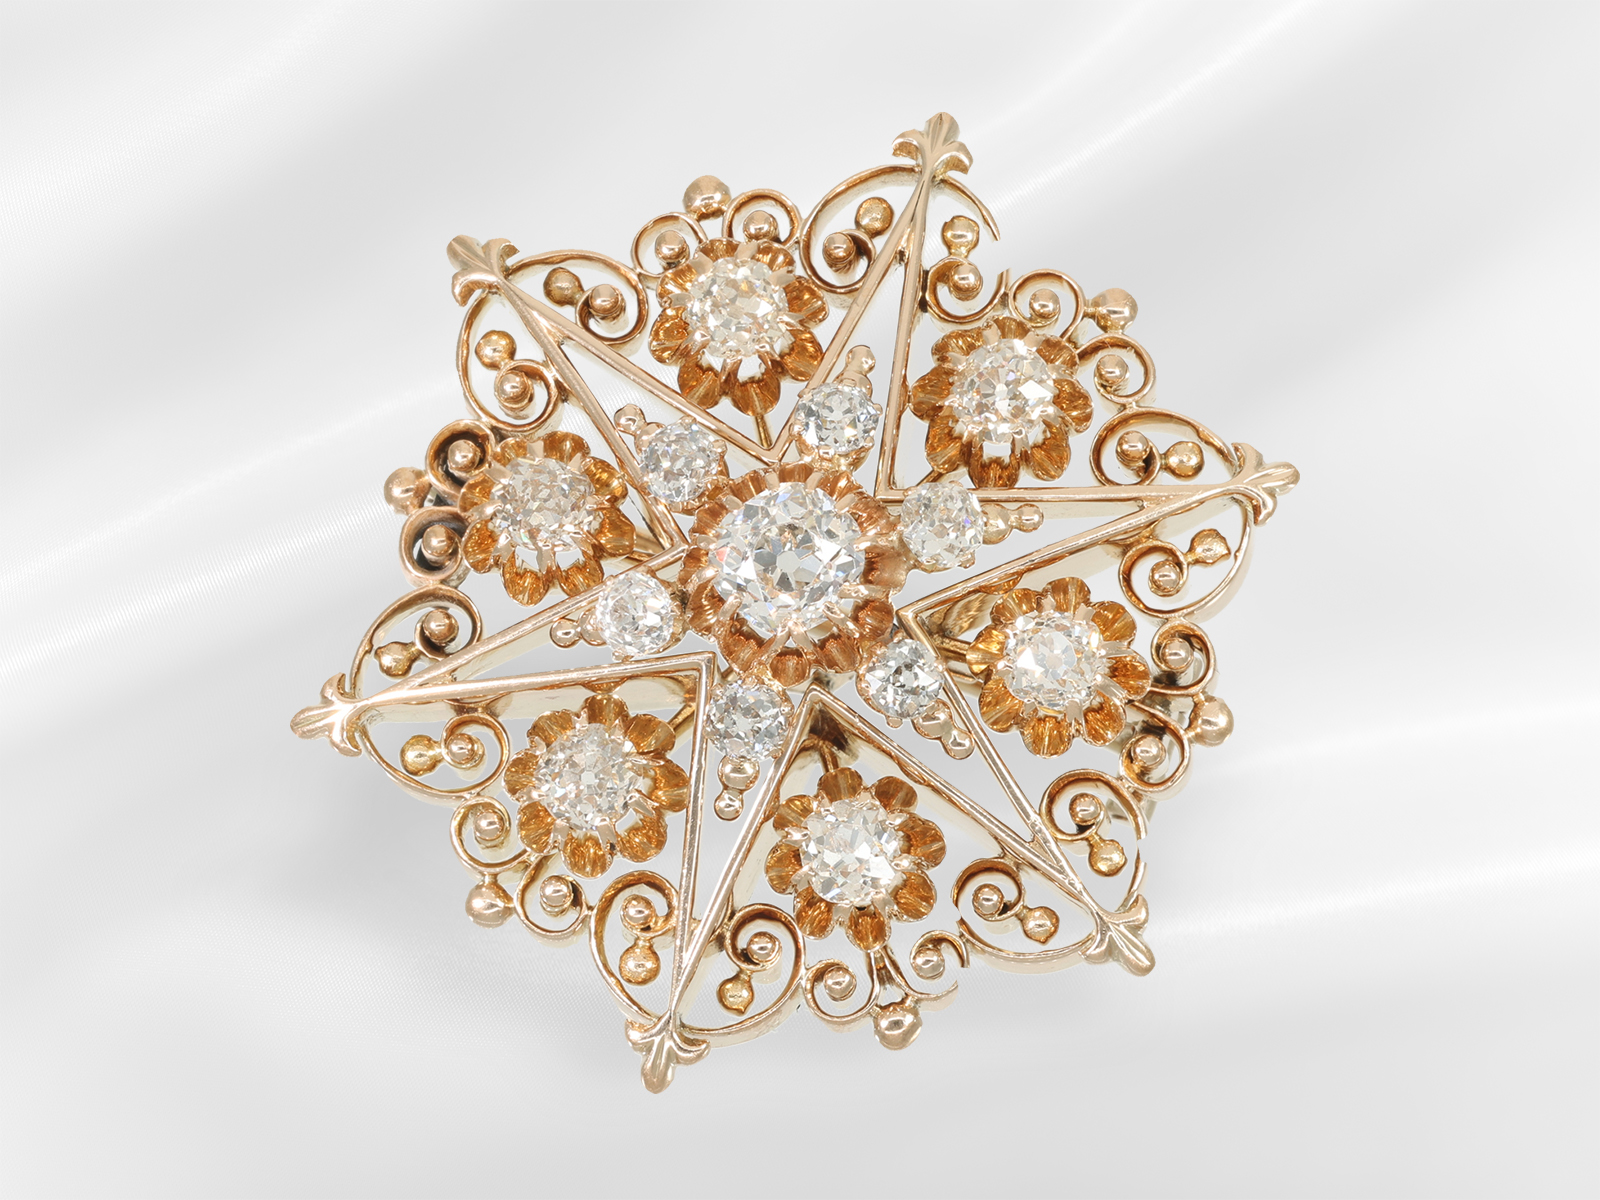 Brooch/pin: valuable old and handcrafted brooch with beautiful diamond setting, 14K gold